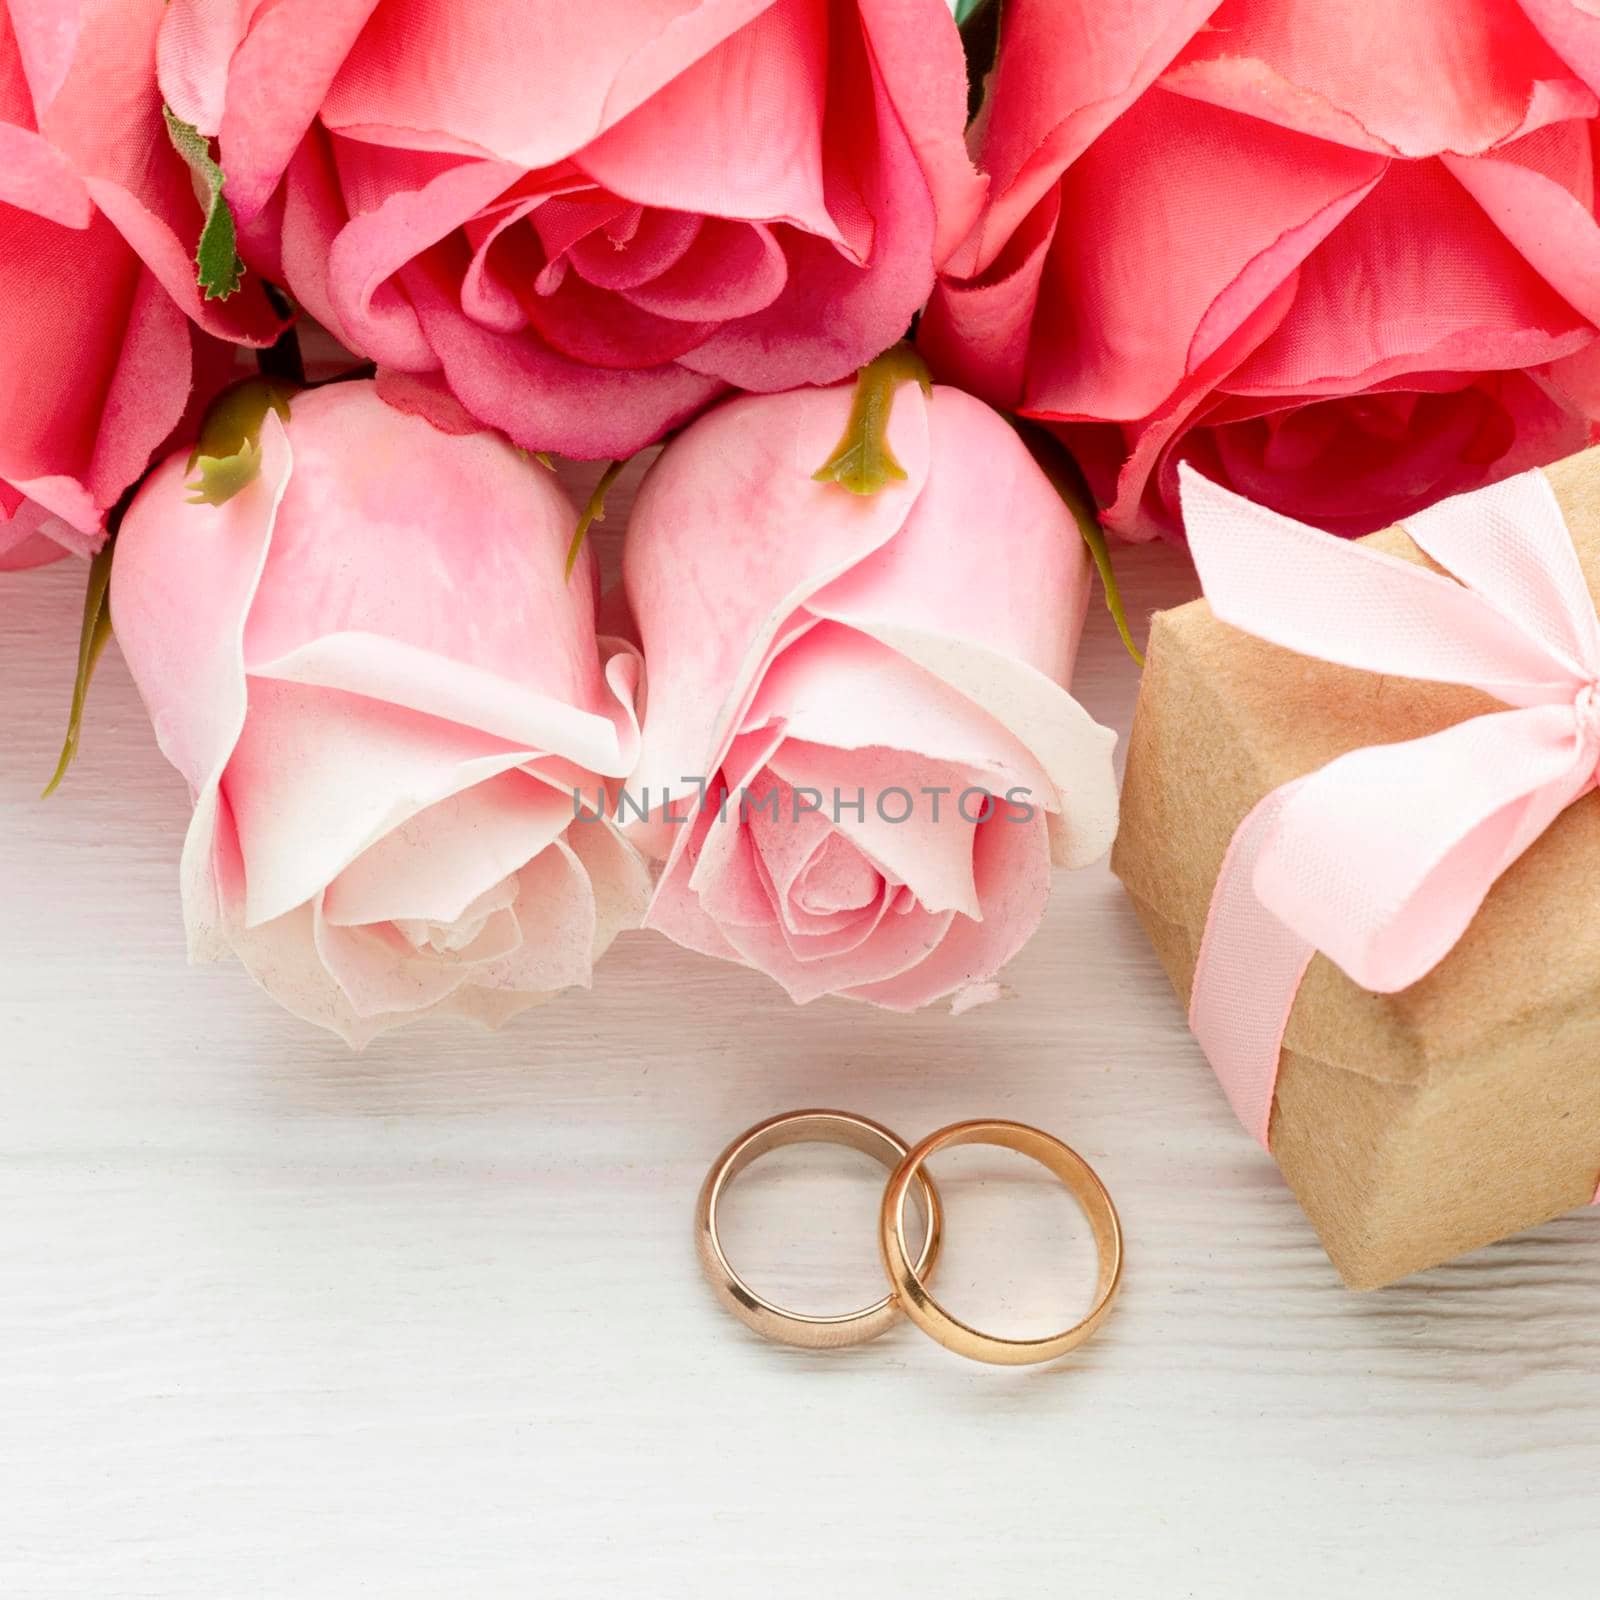 close up pink roses wedding rings. High quality photo by Zahard